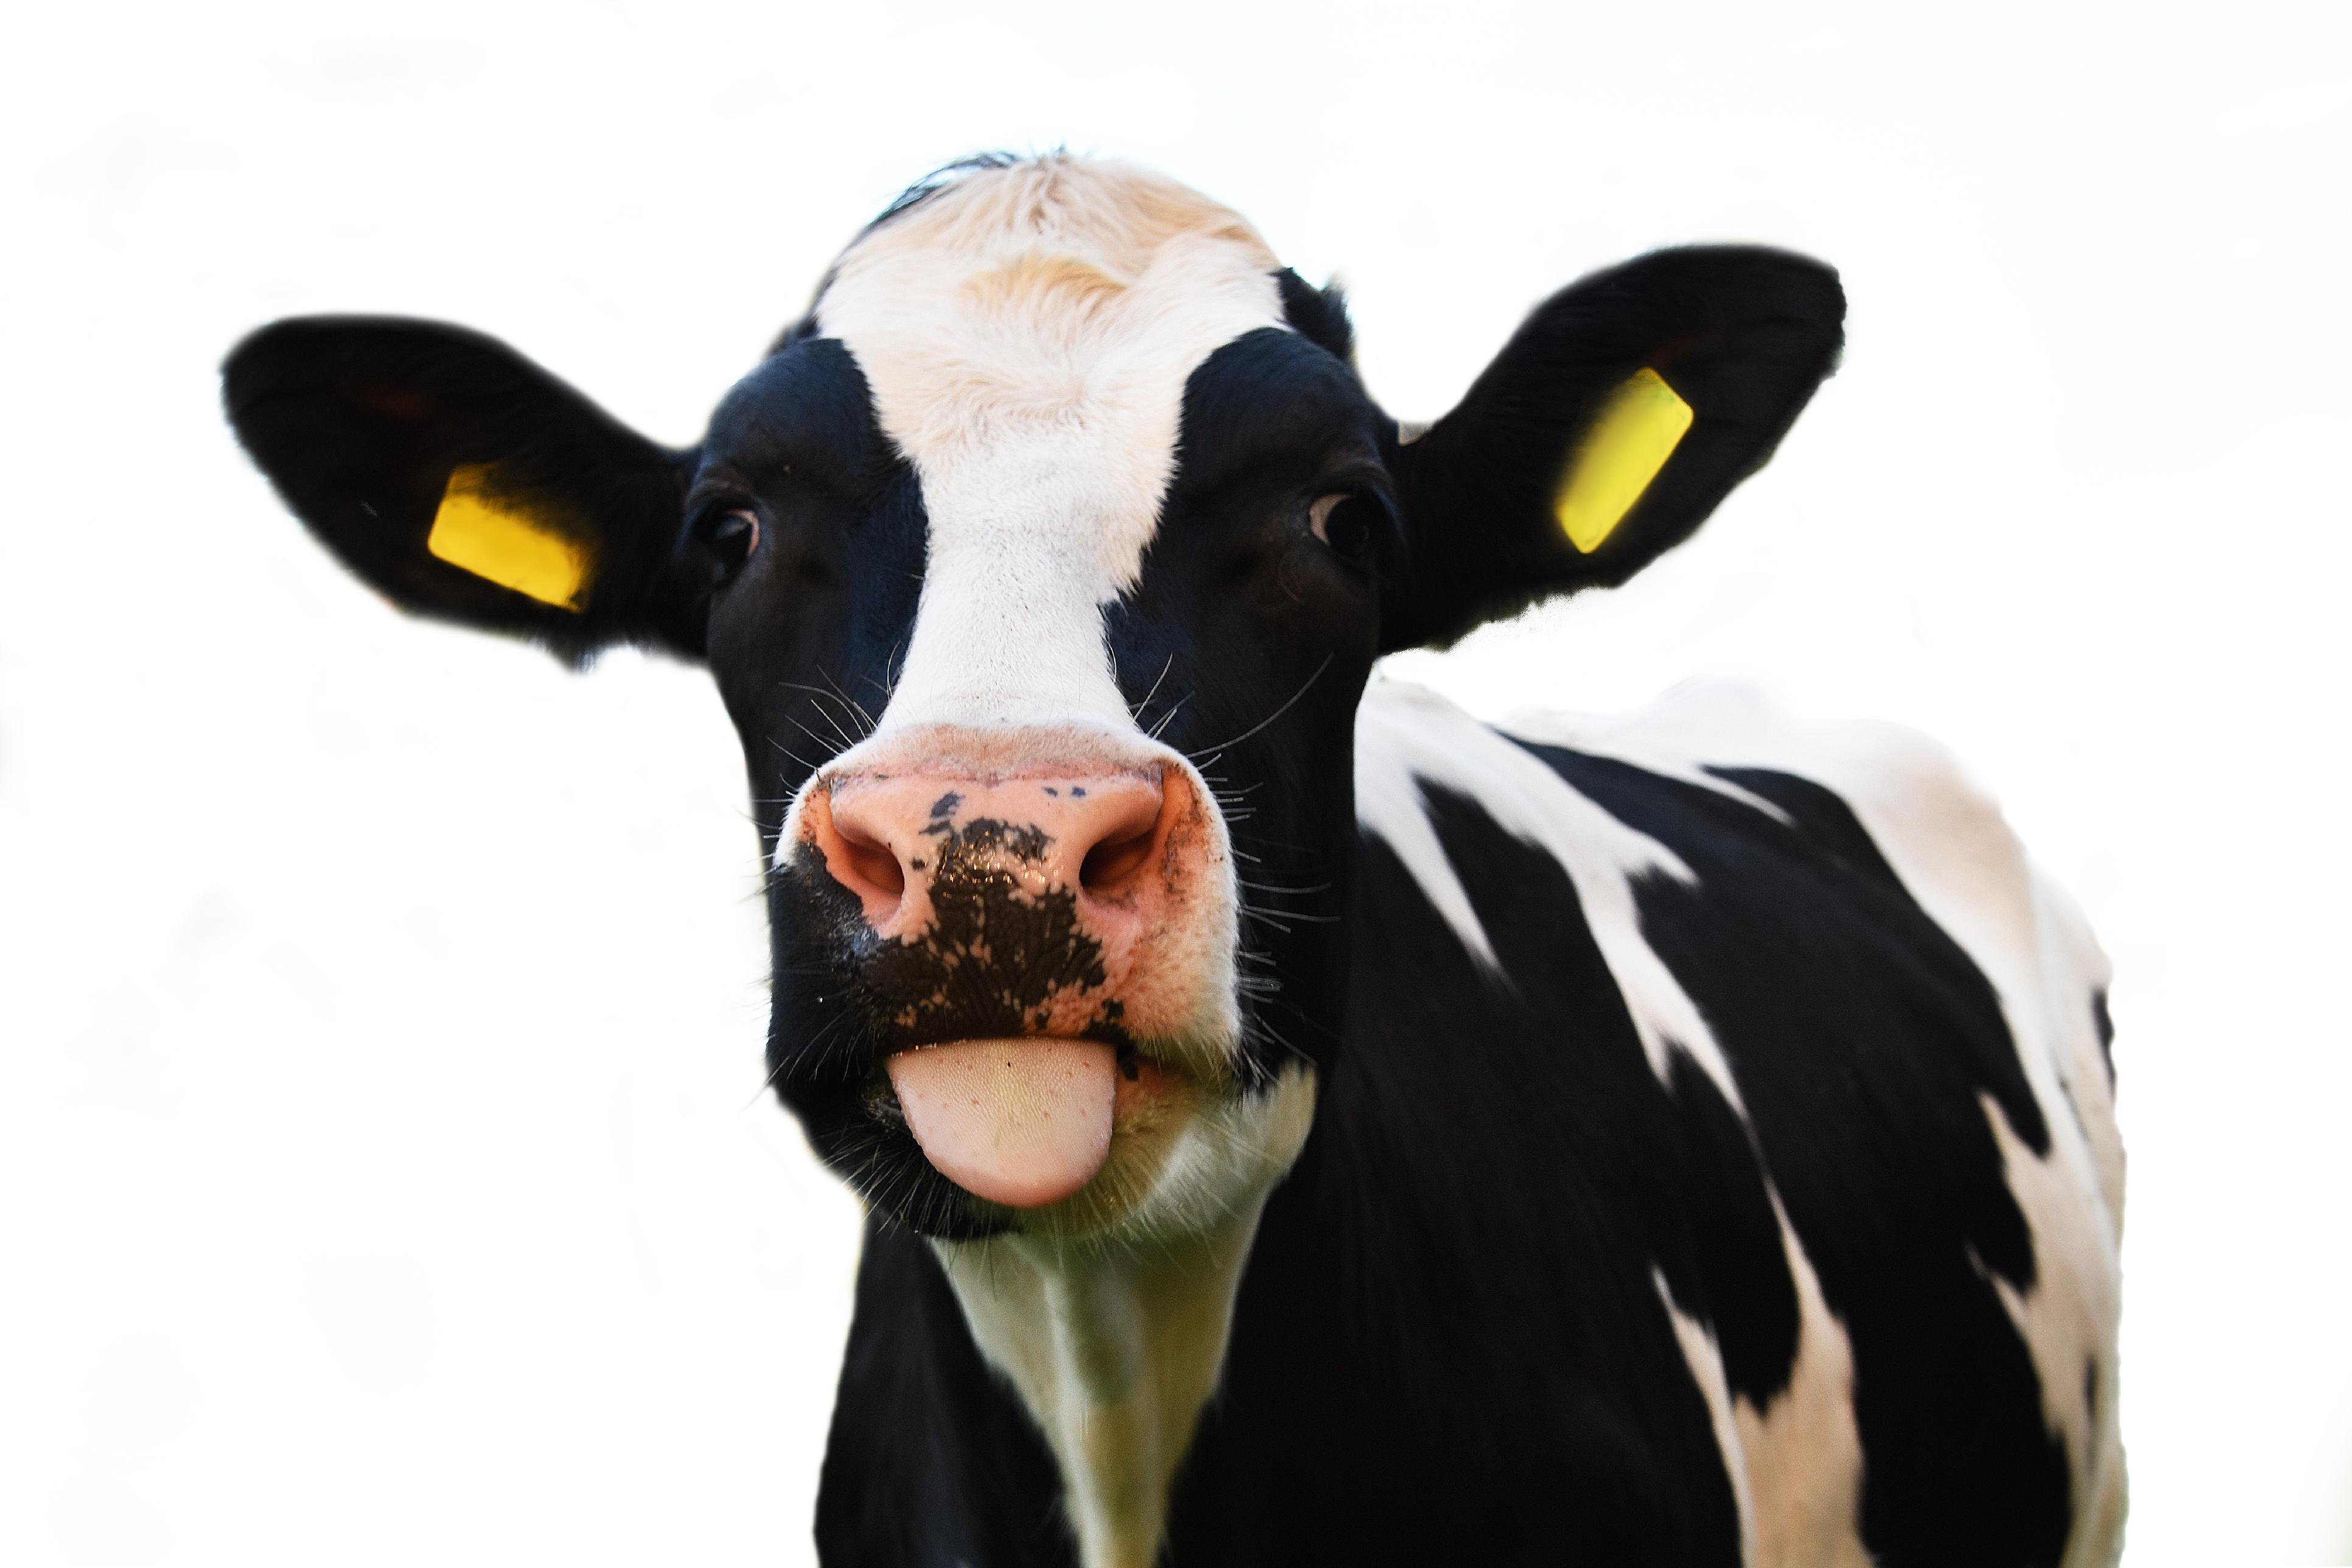 Image is of a black and white cow with yellow tags on its ears facing towards the screen.